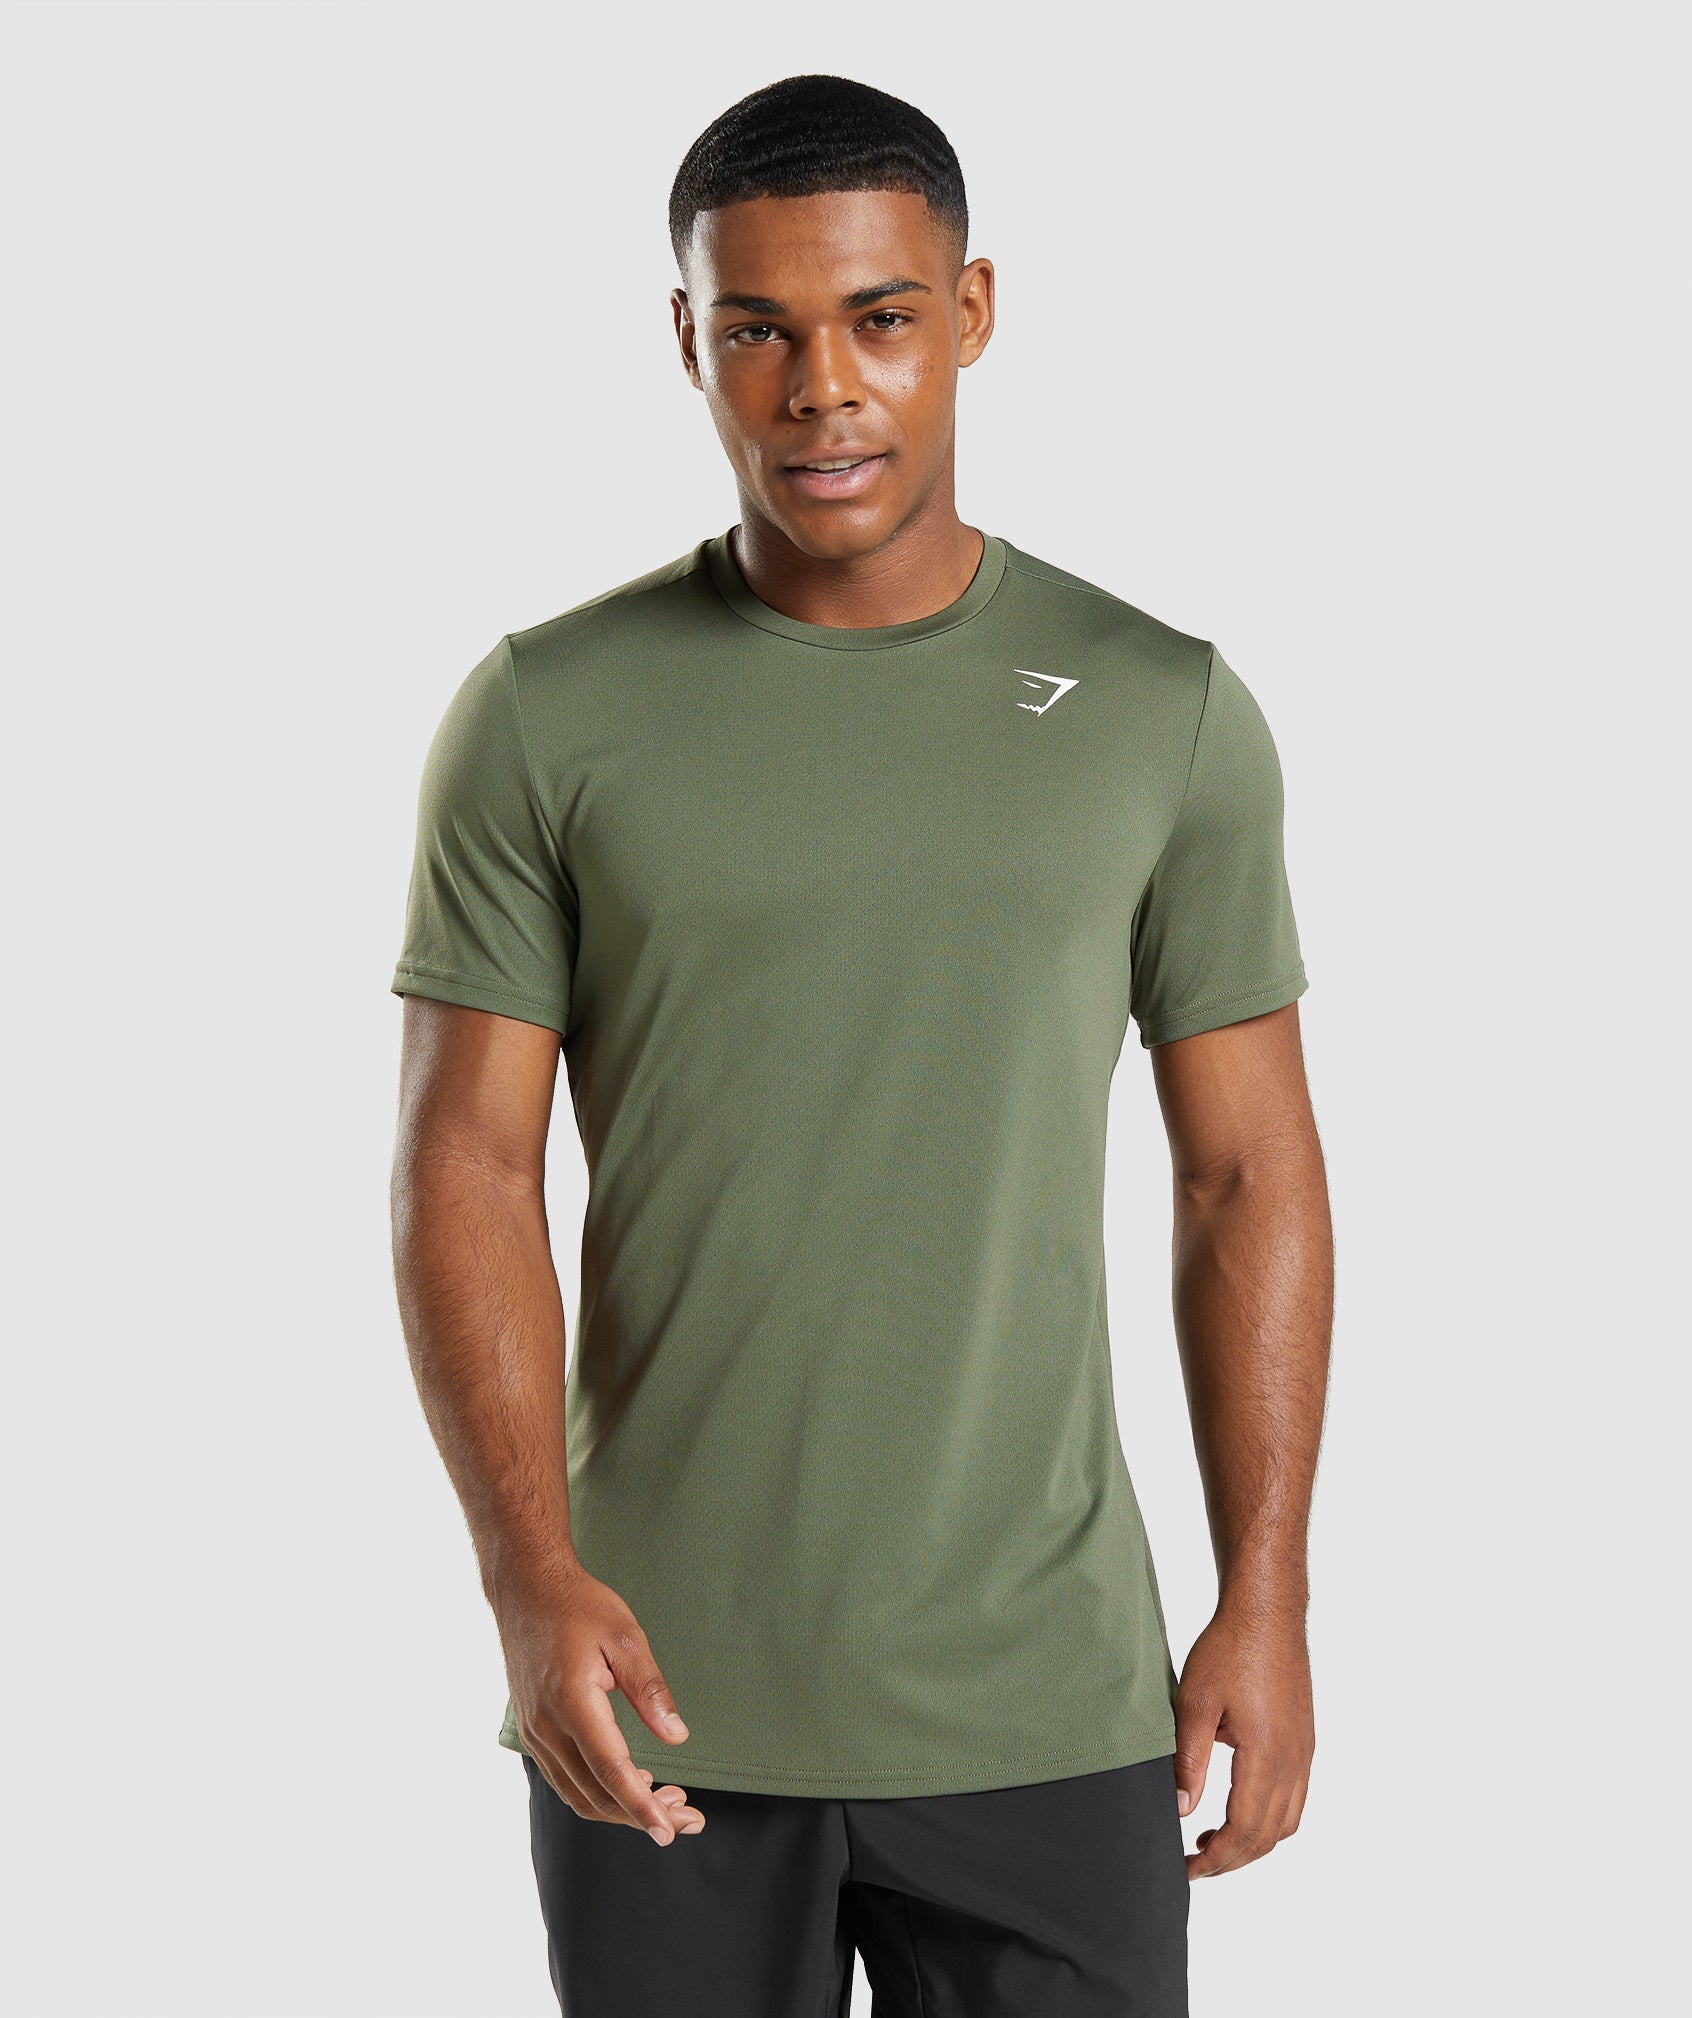 Arrival T-Shirt in Core Olive - view 1